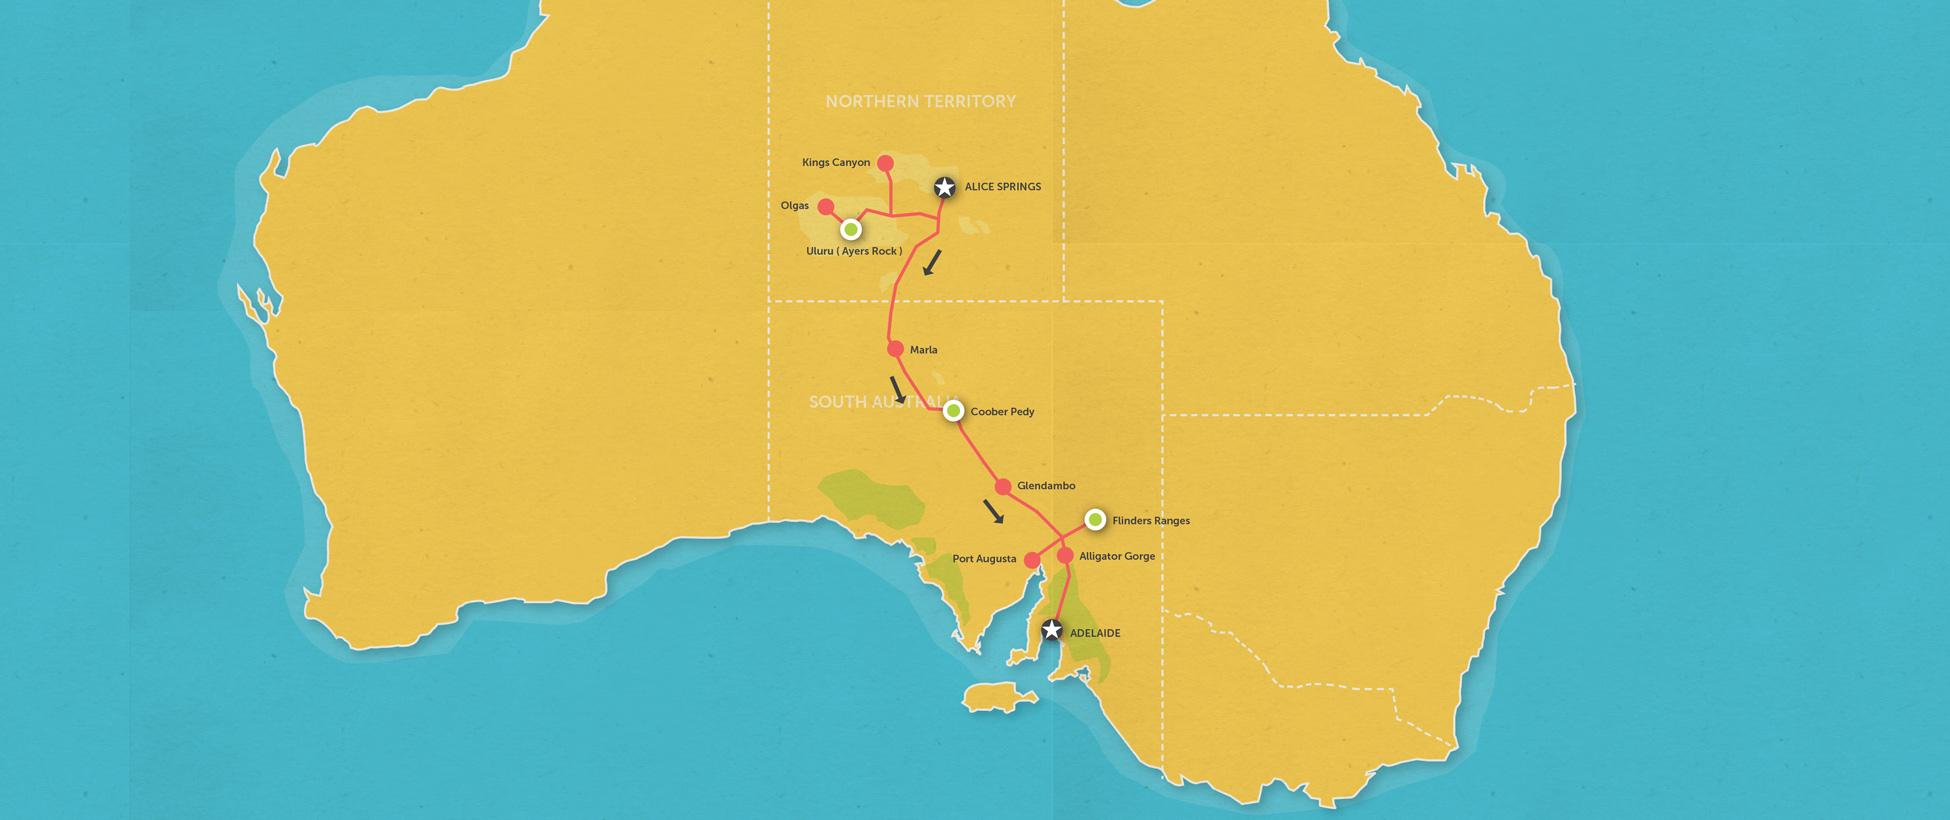 alice springs to adelaide tours